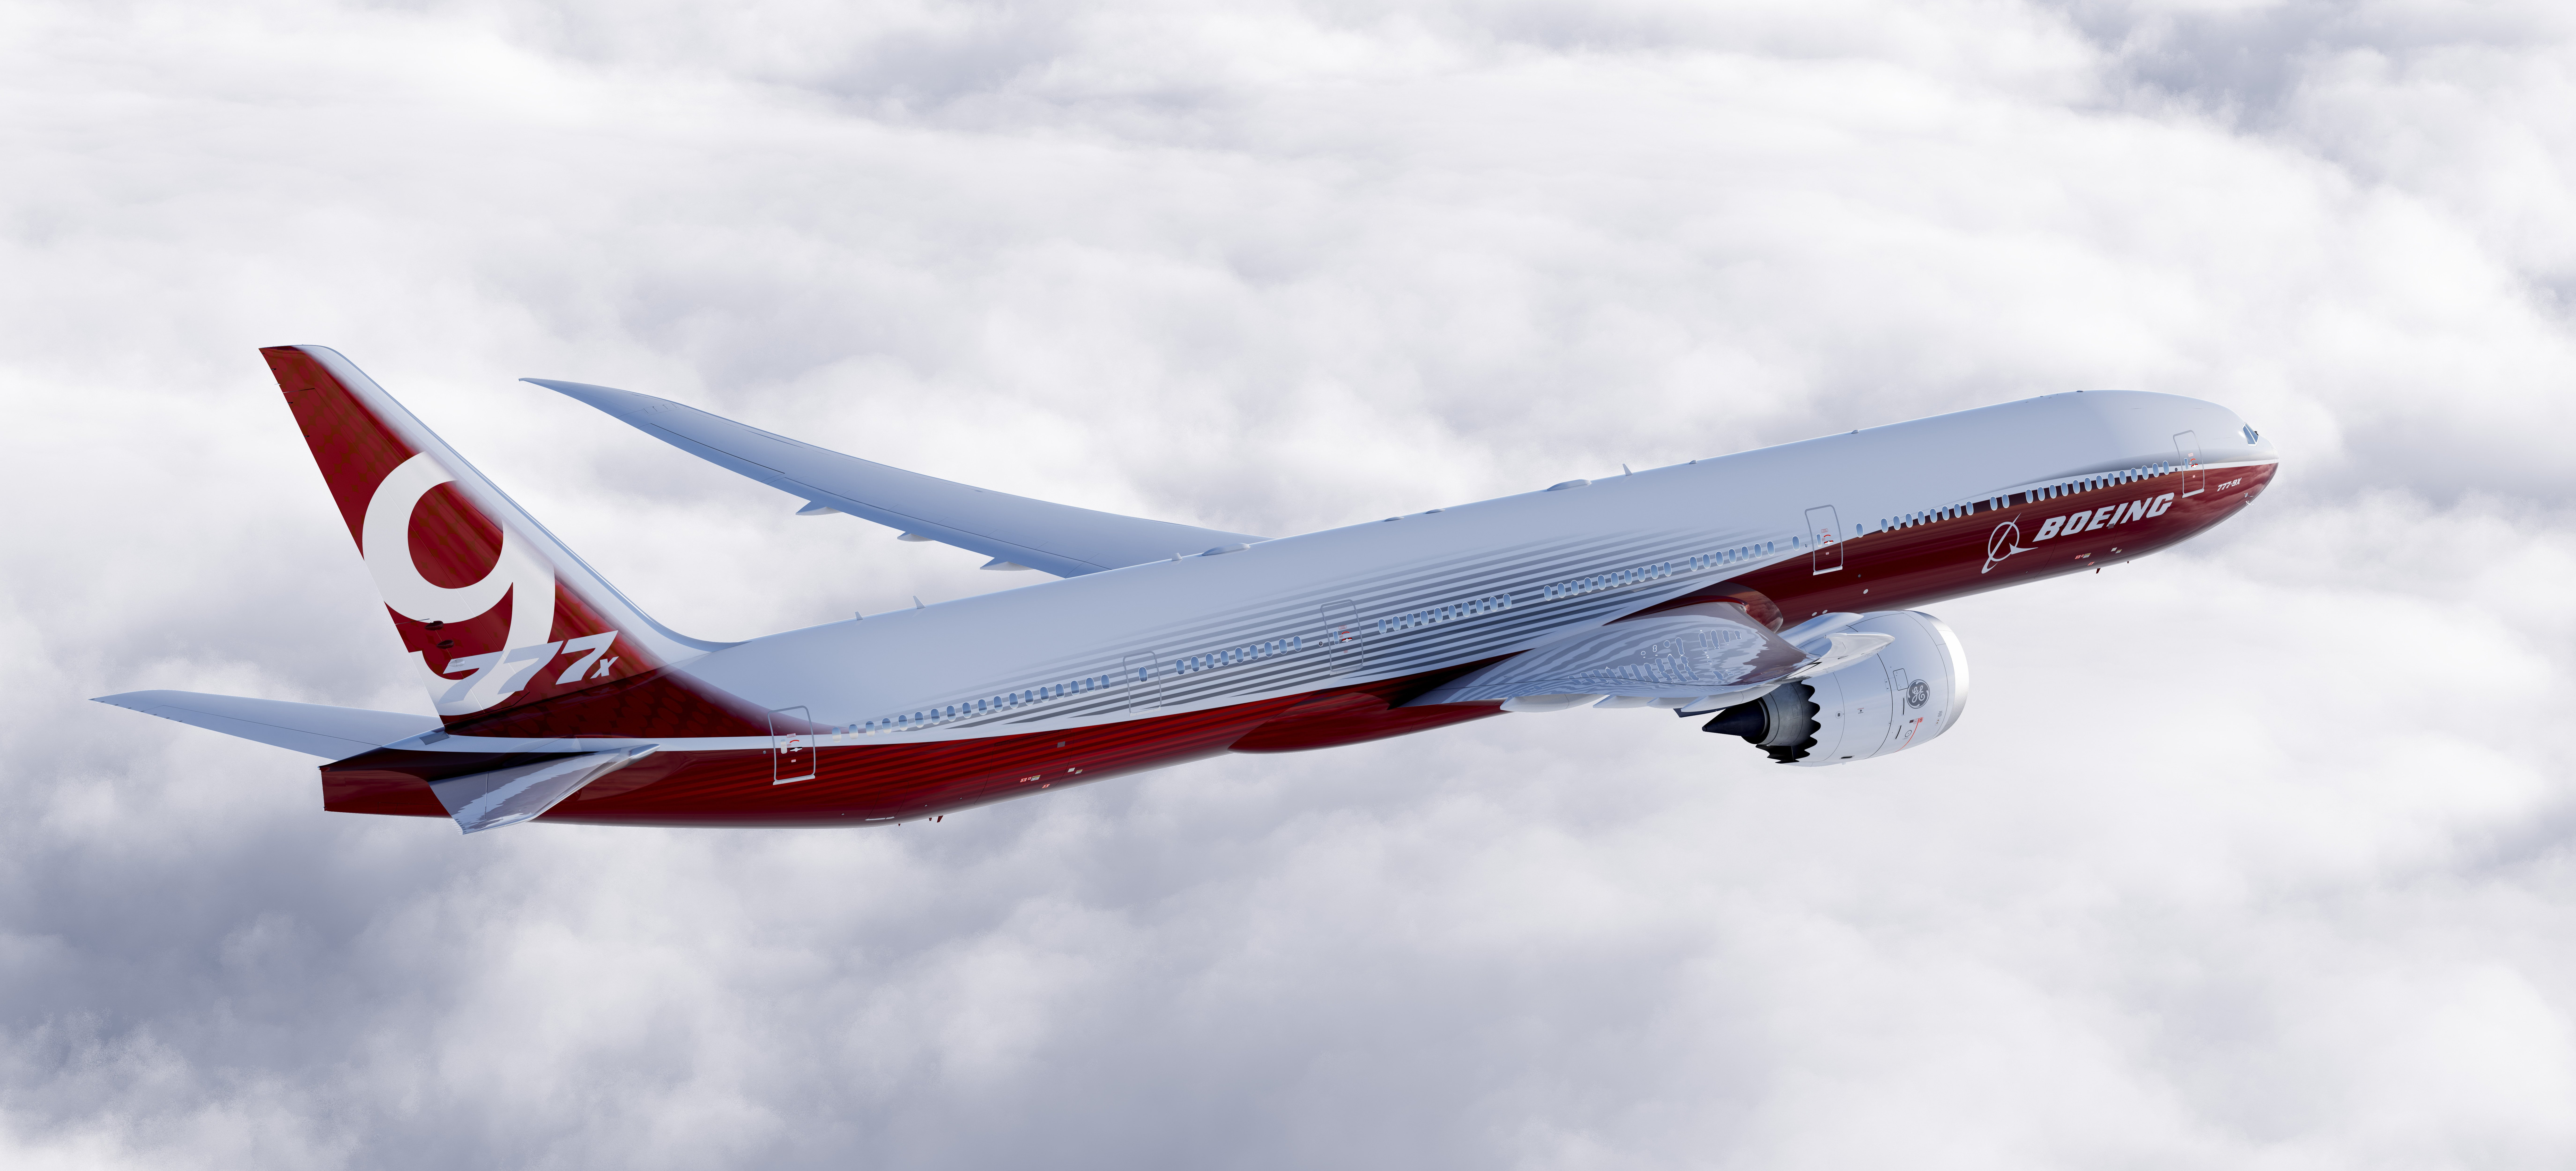 777, 777x, aircraft, airliner, airplane, boeing, jet, transport